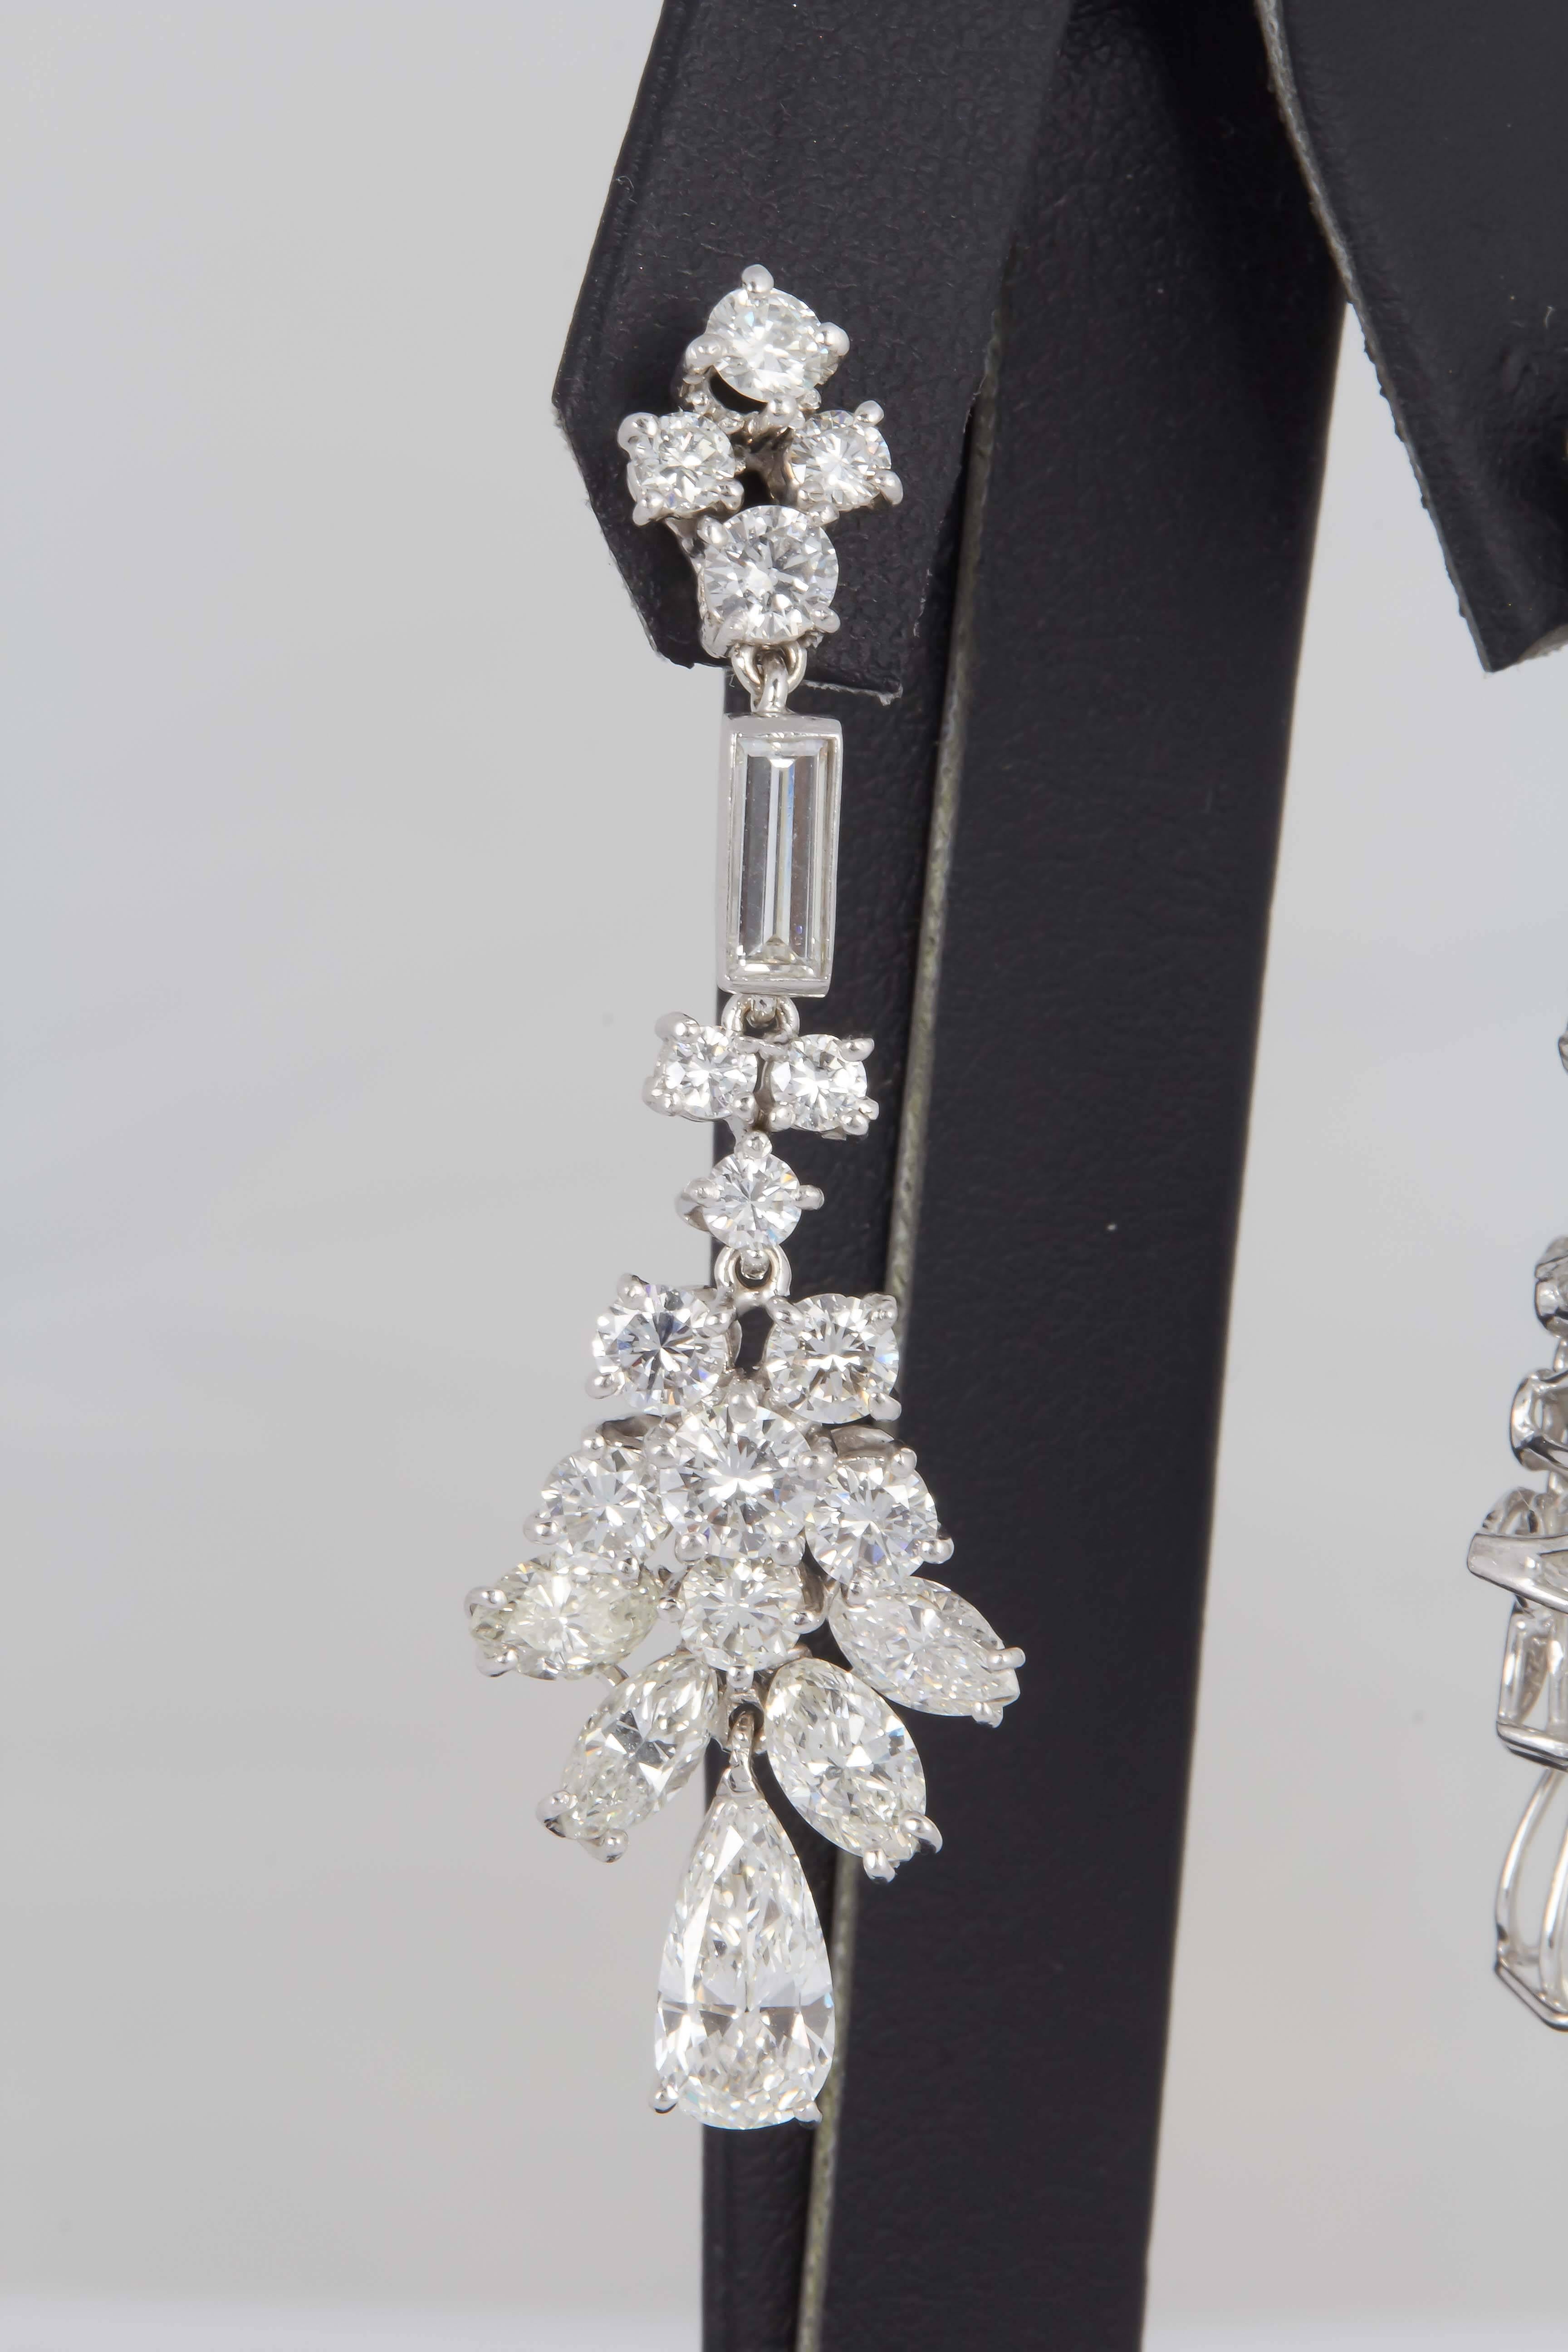 This Earring features:
2 pear shape diamonds 1.80 Cts.
Round Brilliant Diamonds 6.50 Cts.
2 baguette  diamonds  0.40 cts. 
Circa  1950